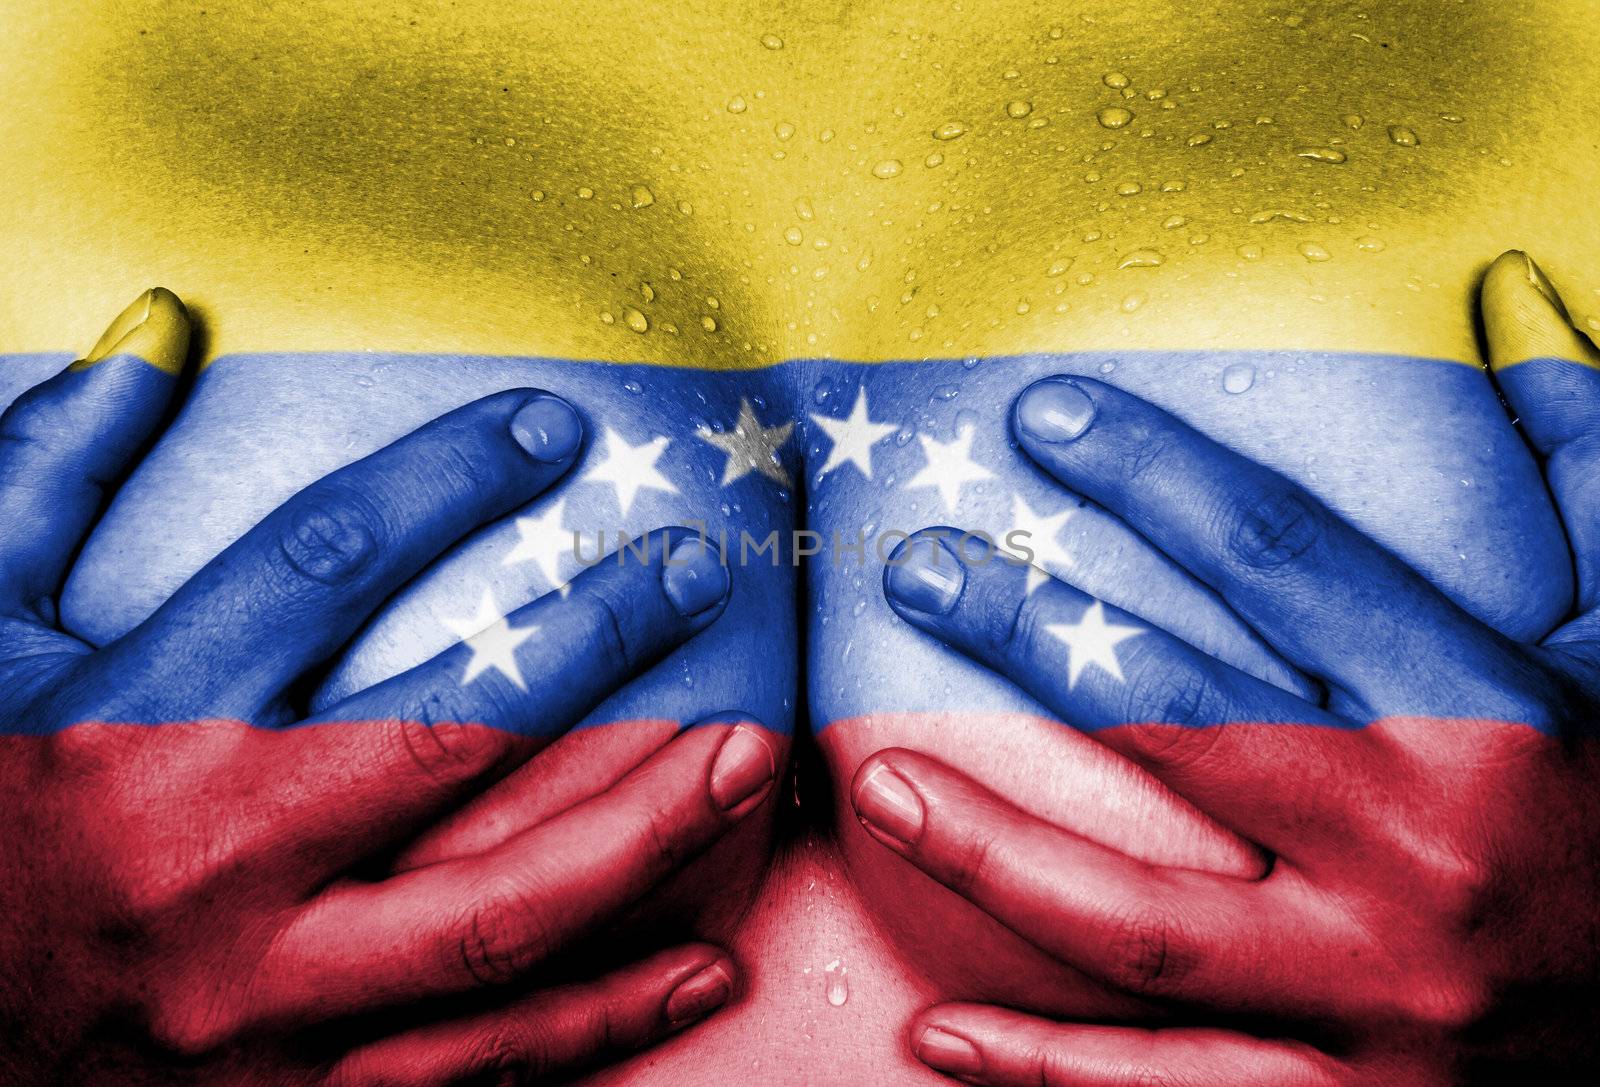 Sweaty upper part of female body, hands covering breasts, flag of Venezuela